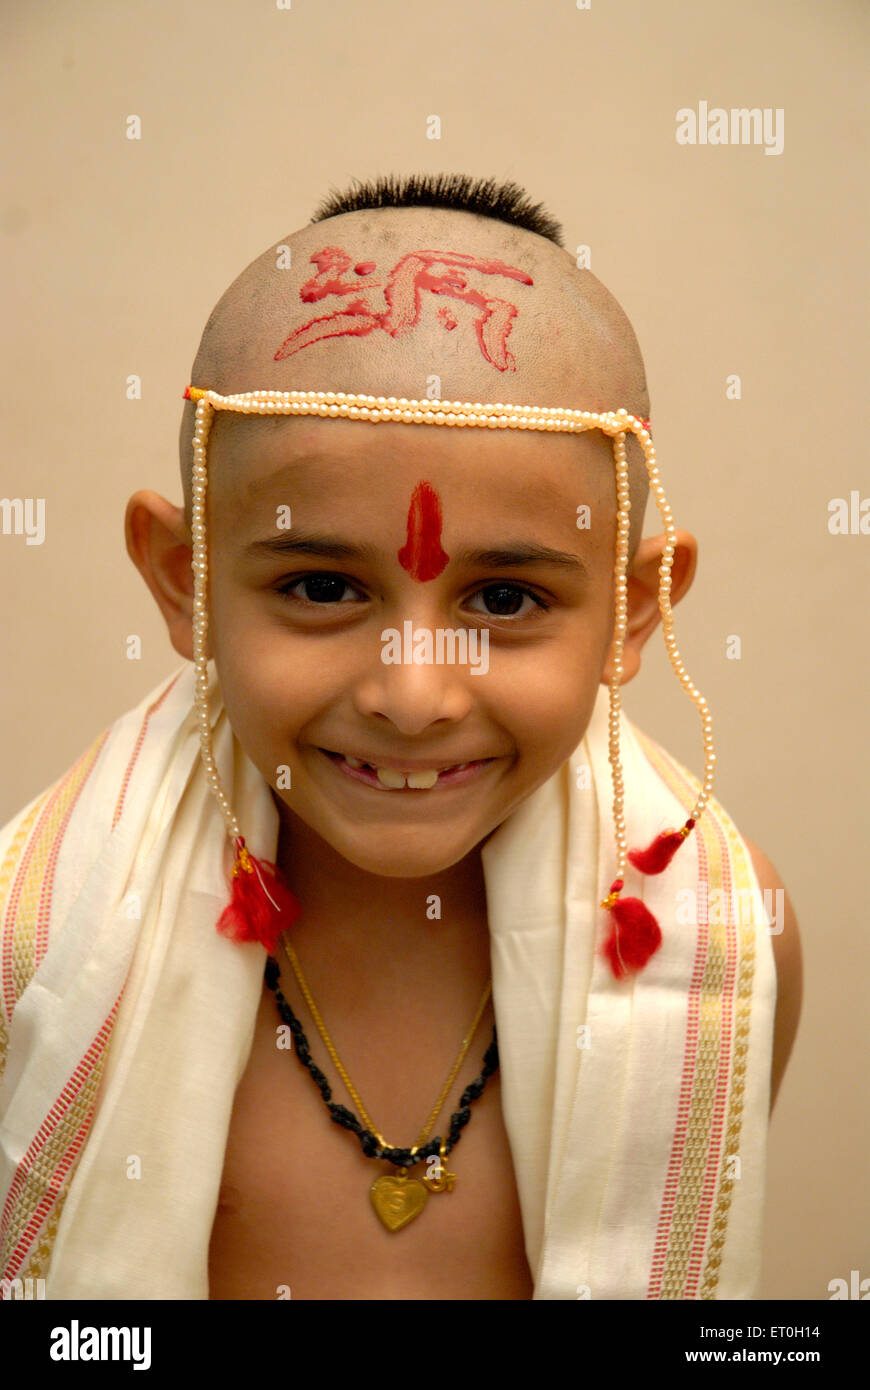 Bald headed eight year old Indian boy thread ceremony India - Model Release #721 Stock Photo